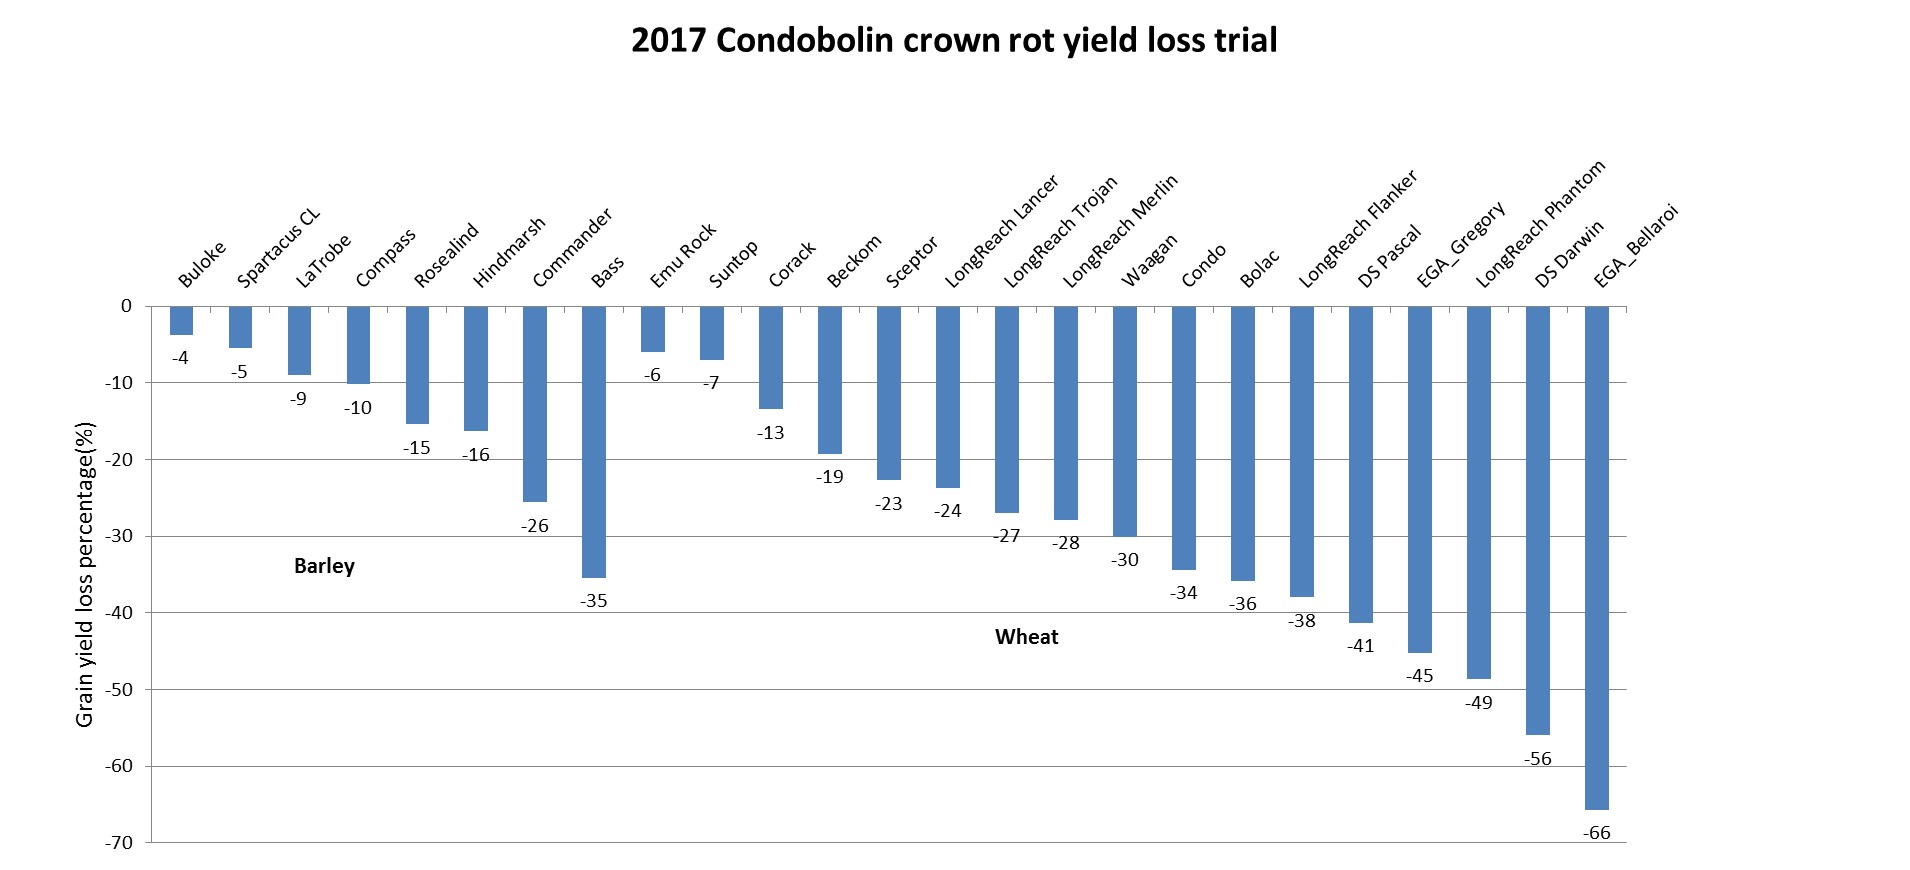 Figure 6. Grain yield reduction between plus crown rot and minus crown rot treatments for eight barley and 17 wheat varieties at the Condobolin Agricultural Research and Advisory Station, 2017.